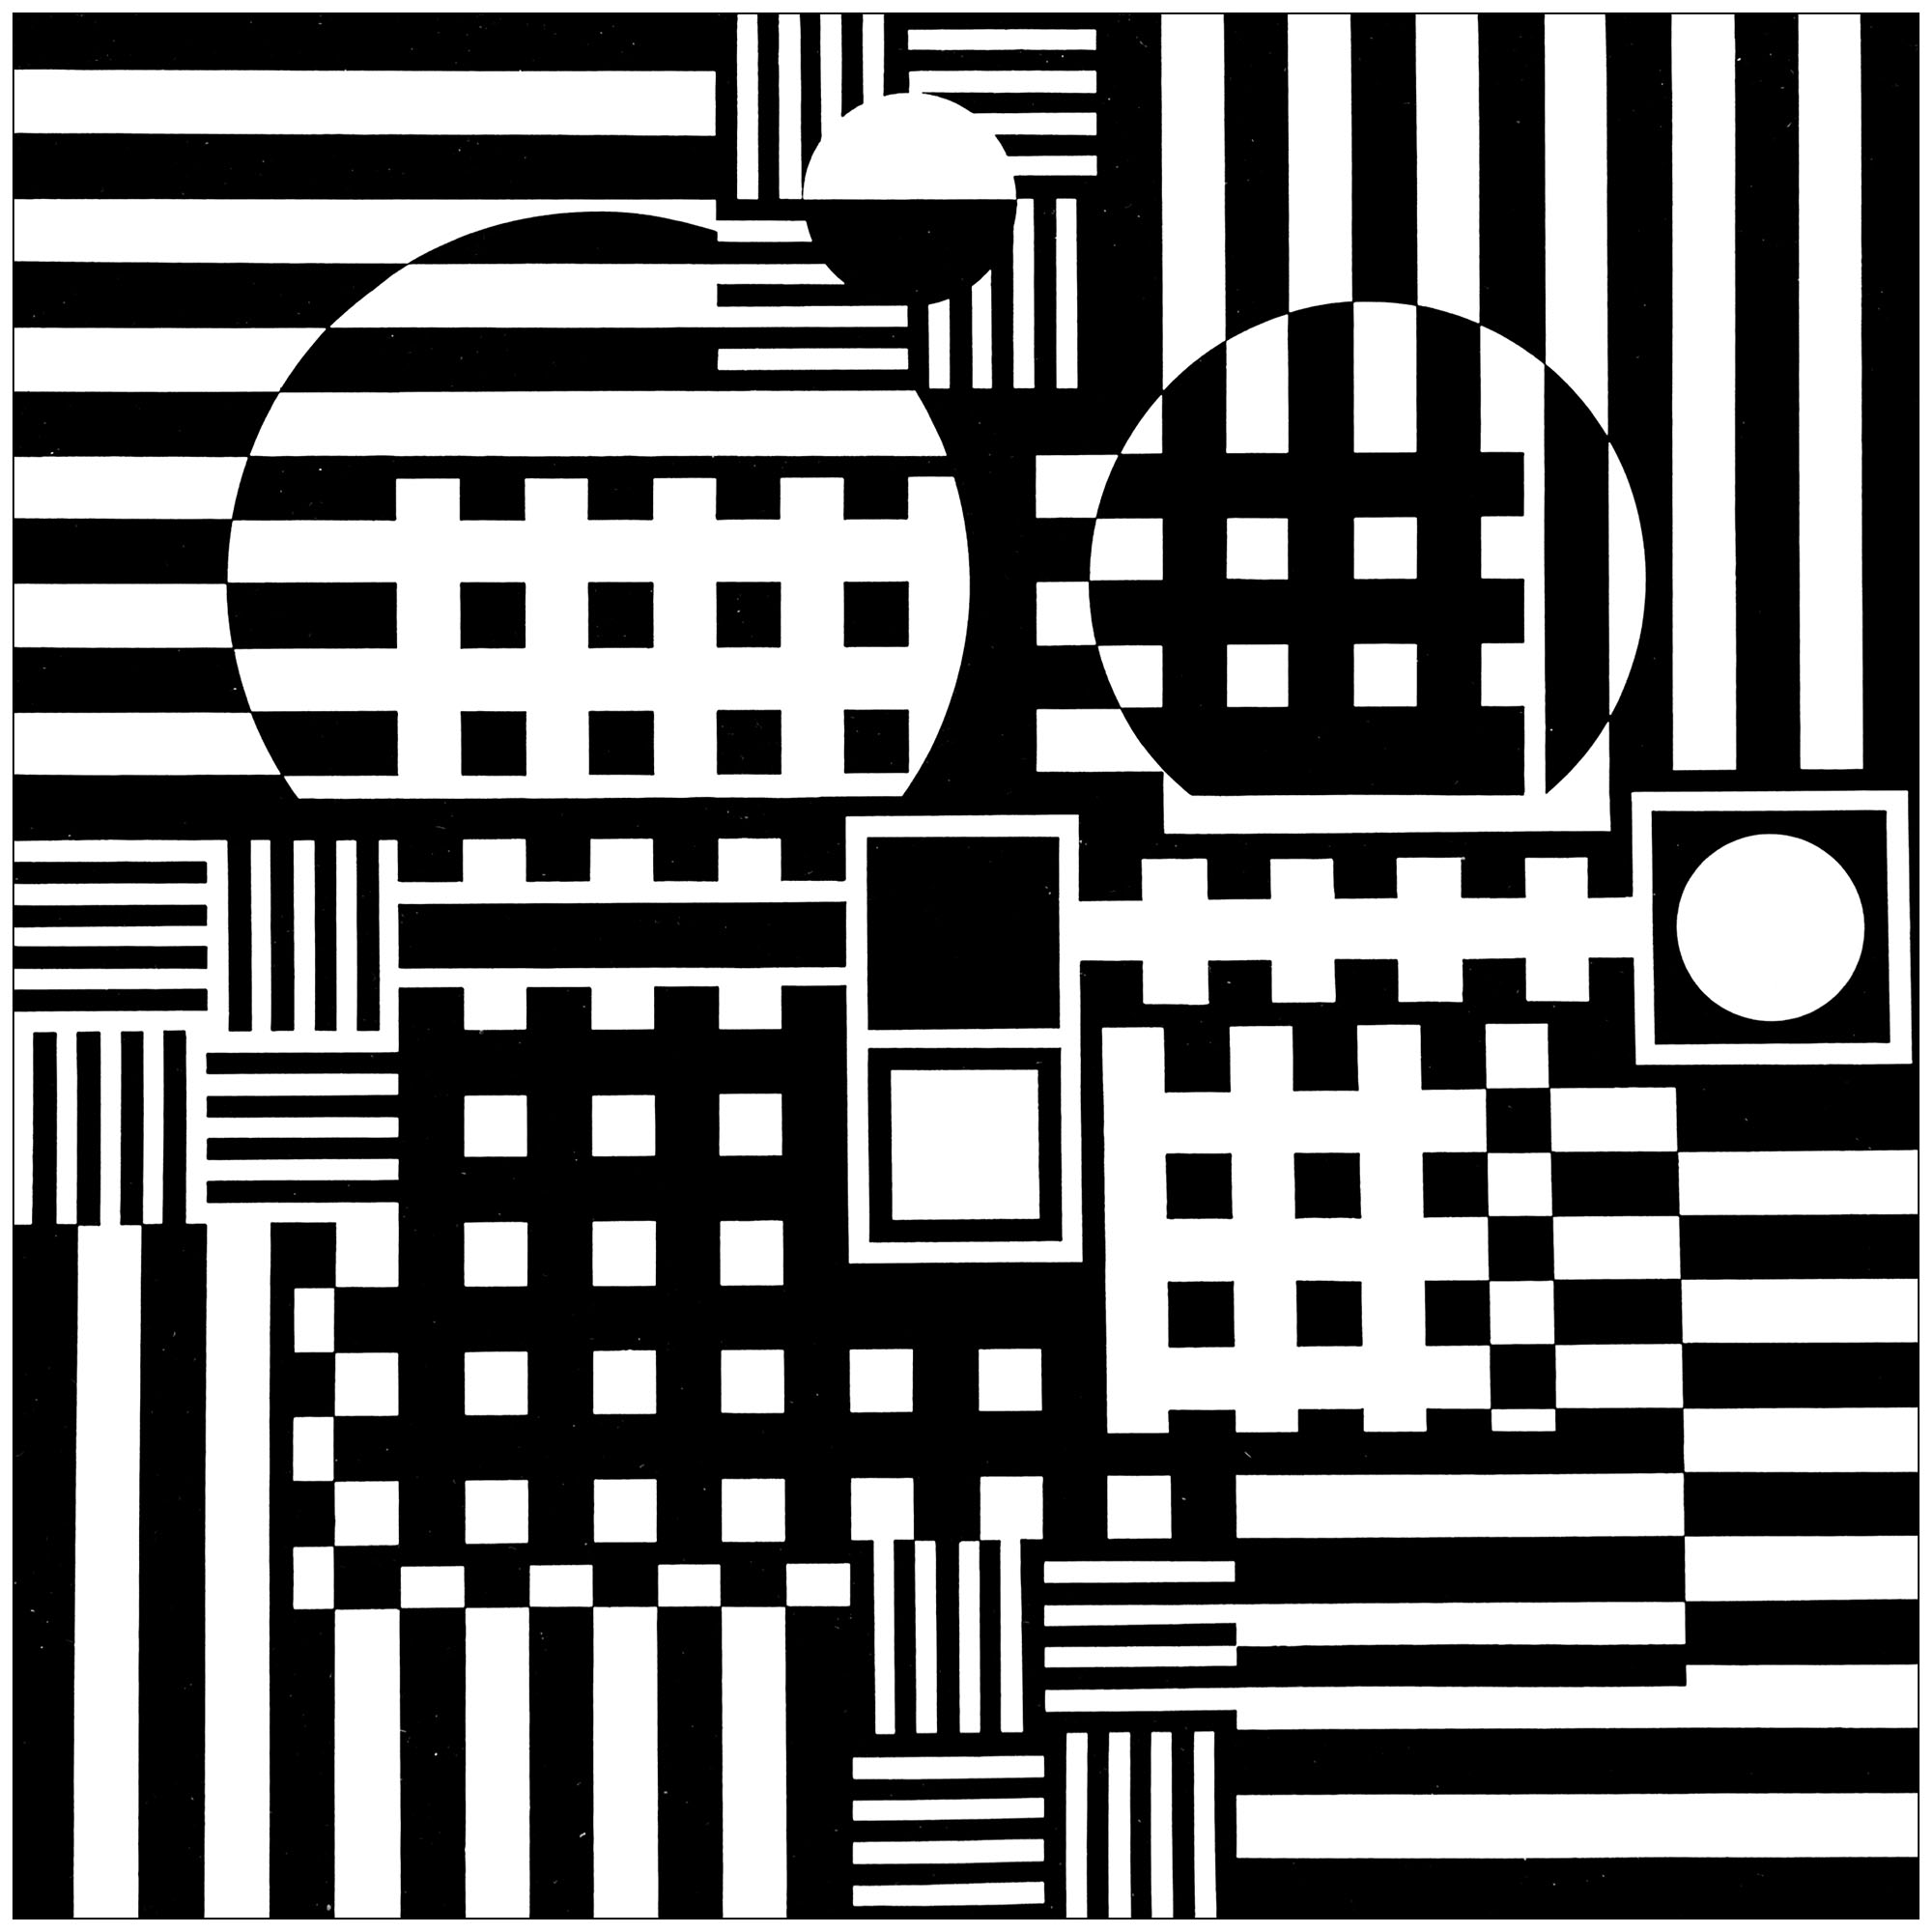 Coloring page created from Jeruza (1957) by Victor Vasarely